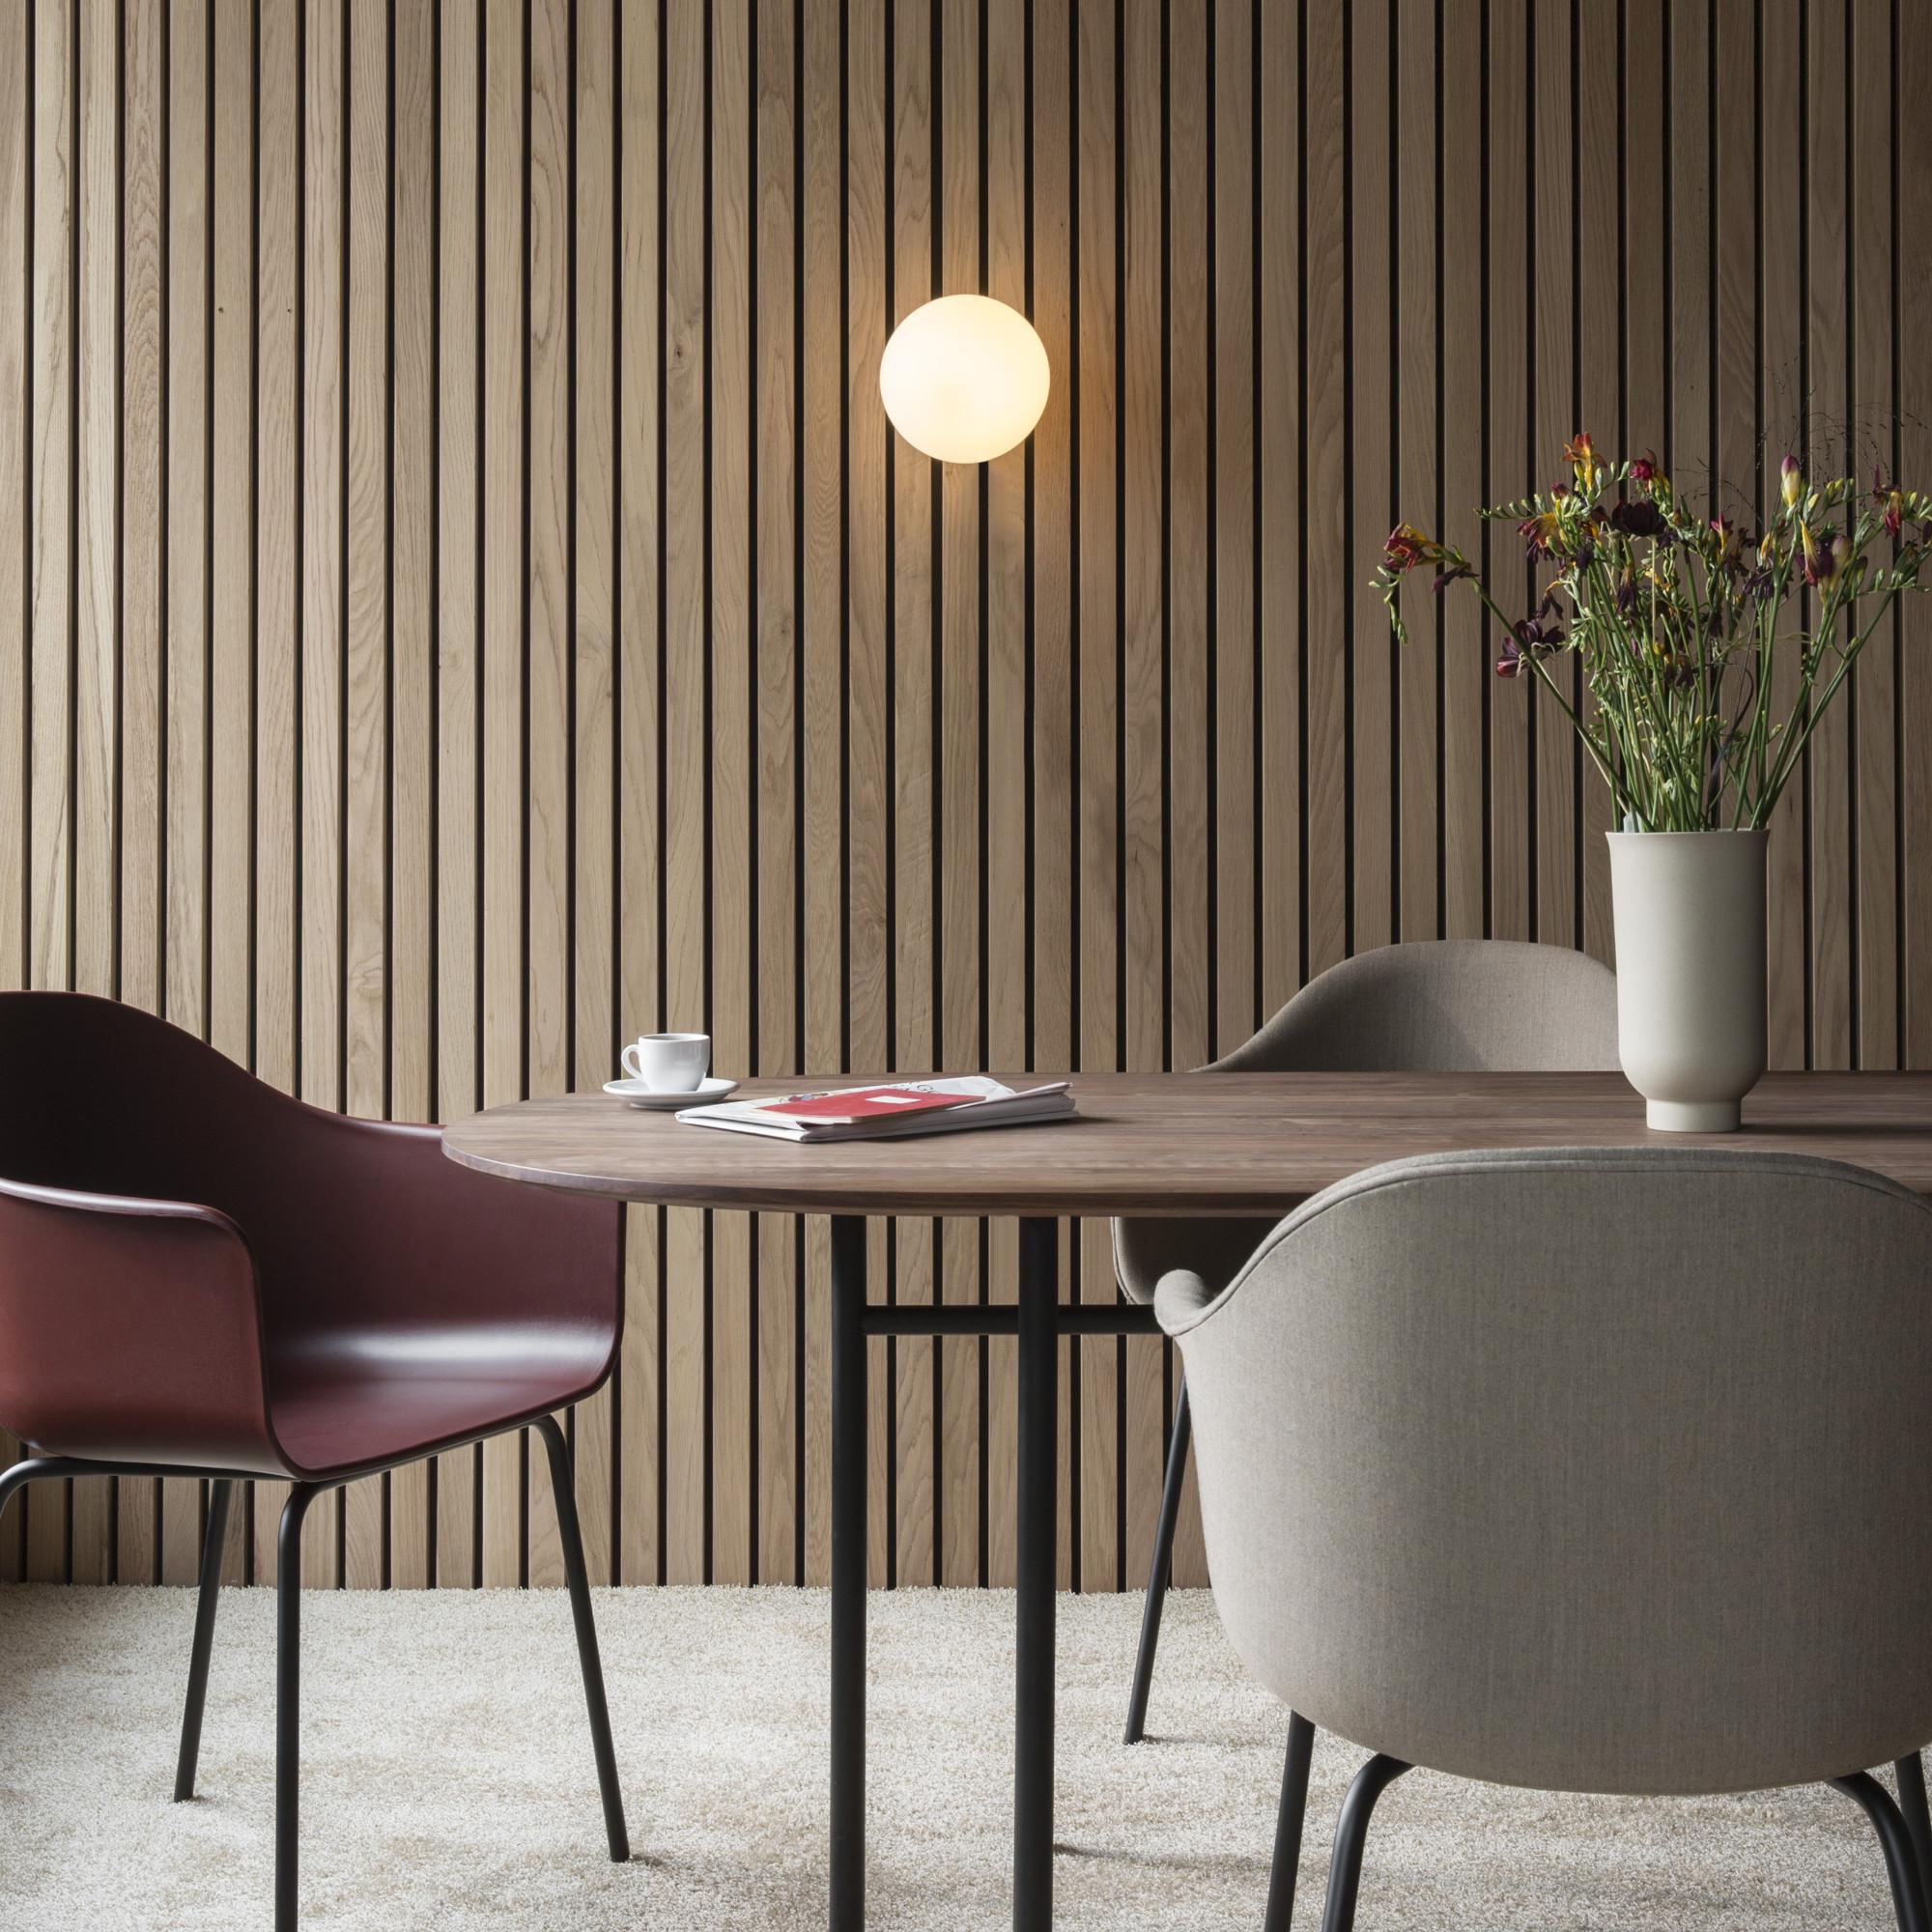 Conceived during the design process for our new creative destination Menu Space located in Copenhagen’s thriving Nordhavn (Northern Harbour) area, the Harbour Chair is the result of fulfilling a variety of needs (among others) comfortable